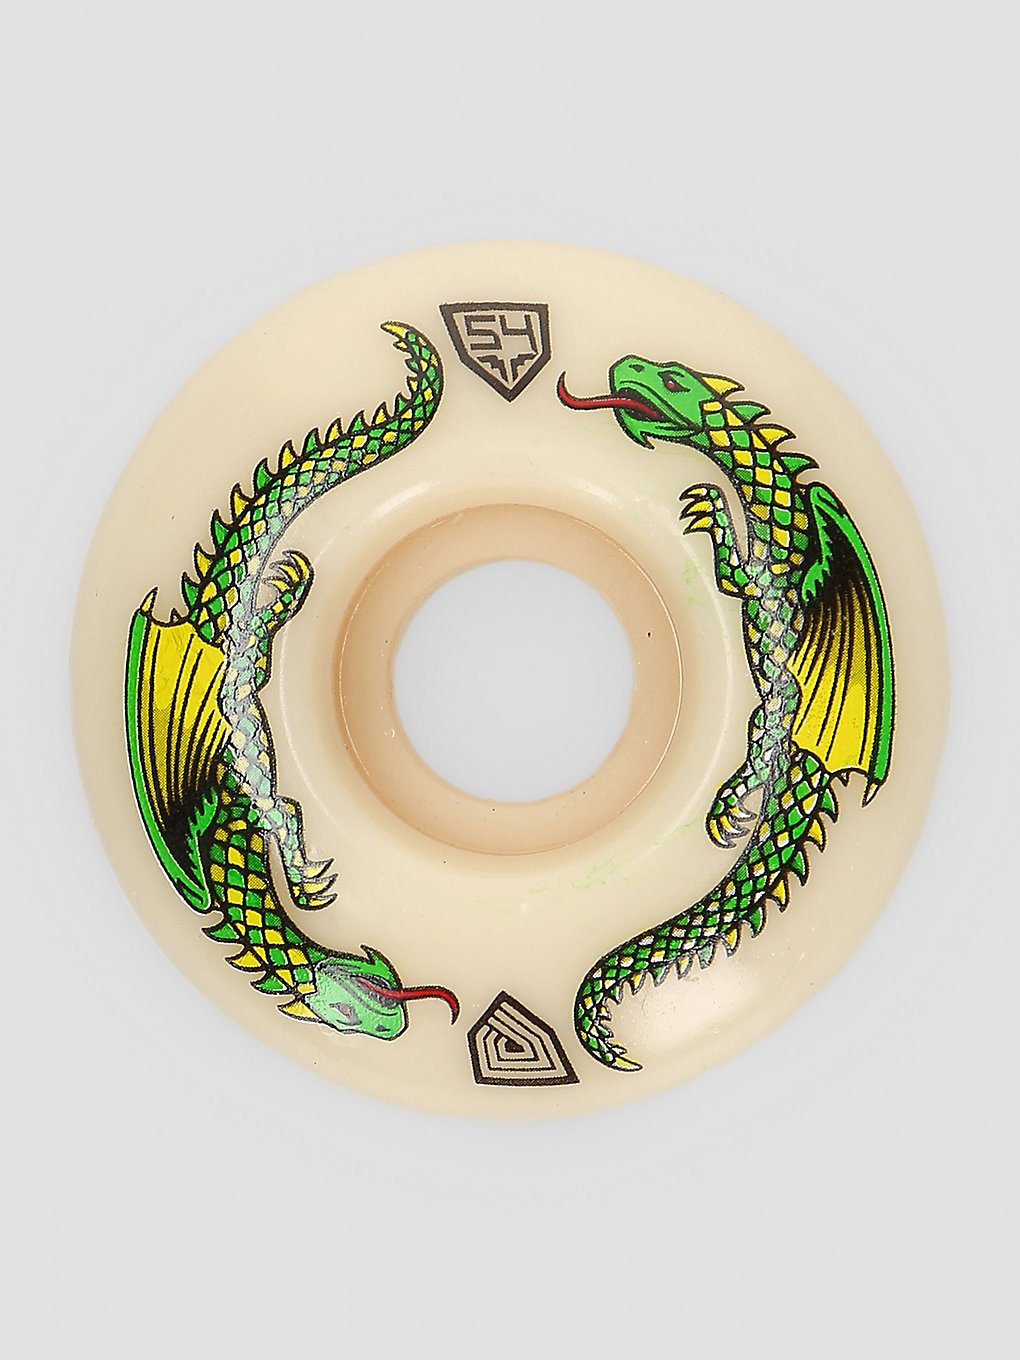 Powell Peralta Dragons 93A V4 Wide 54mm Rollen offwhite kaufen